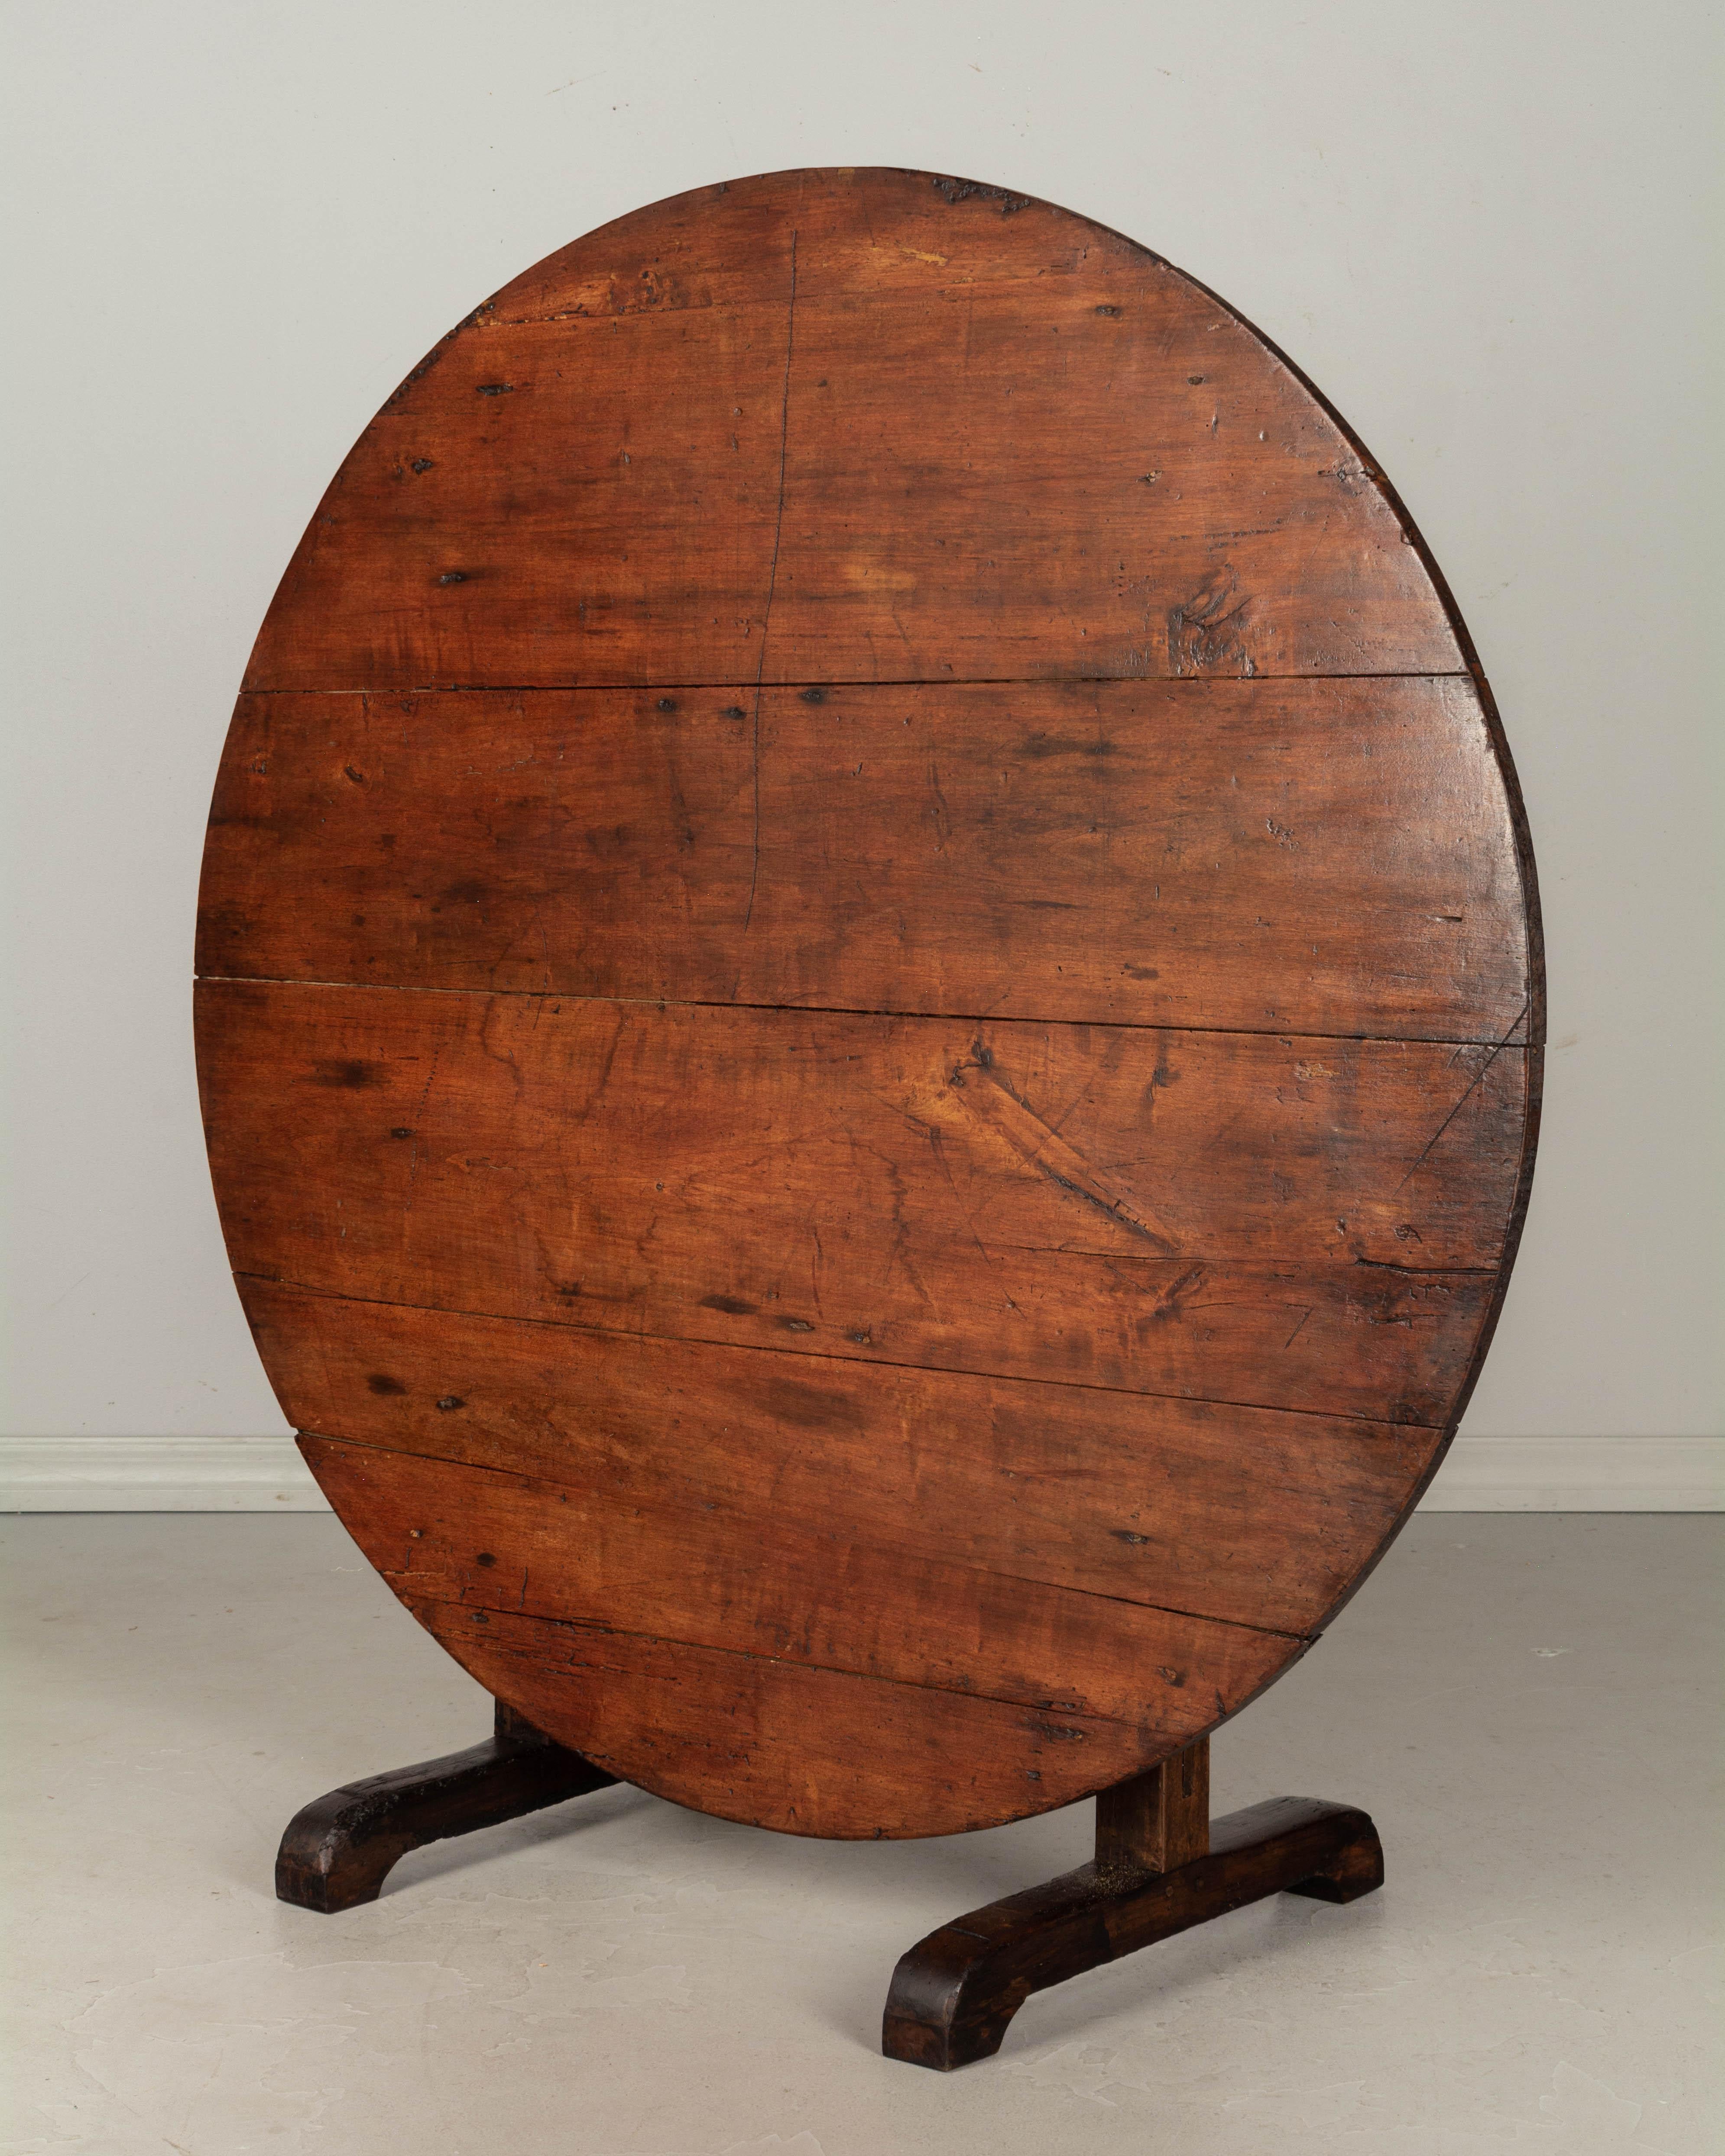 A 19th century French wine tasting, or tilt-top table with a top made of poplar and the base made of solid oak. Sturdy and well-crafted with mortise and tenon joints and pegged construction. This table was once covered with cloth. Waxed finish. The